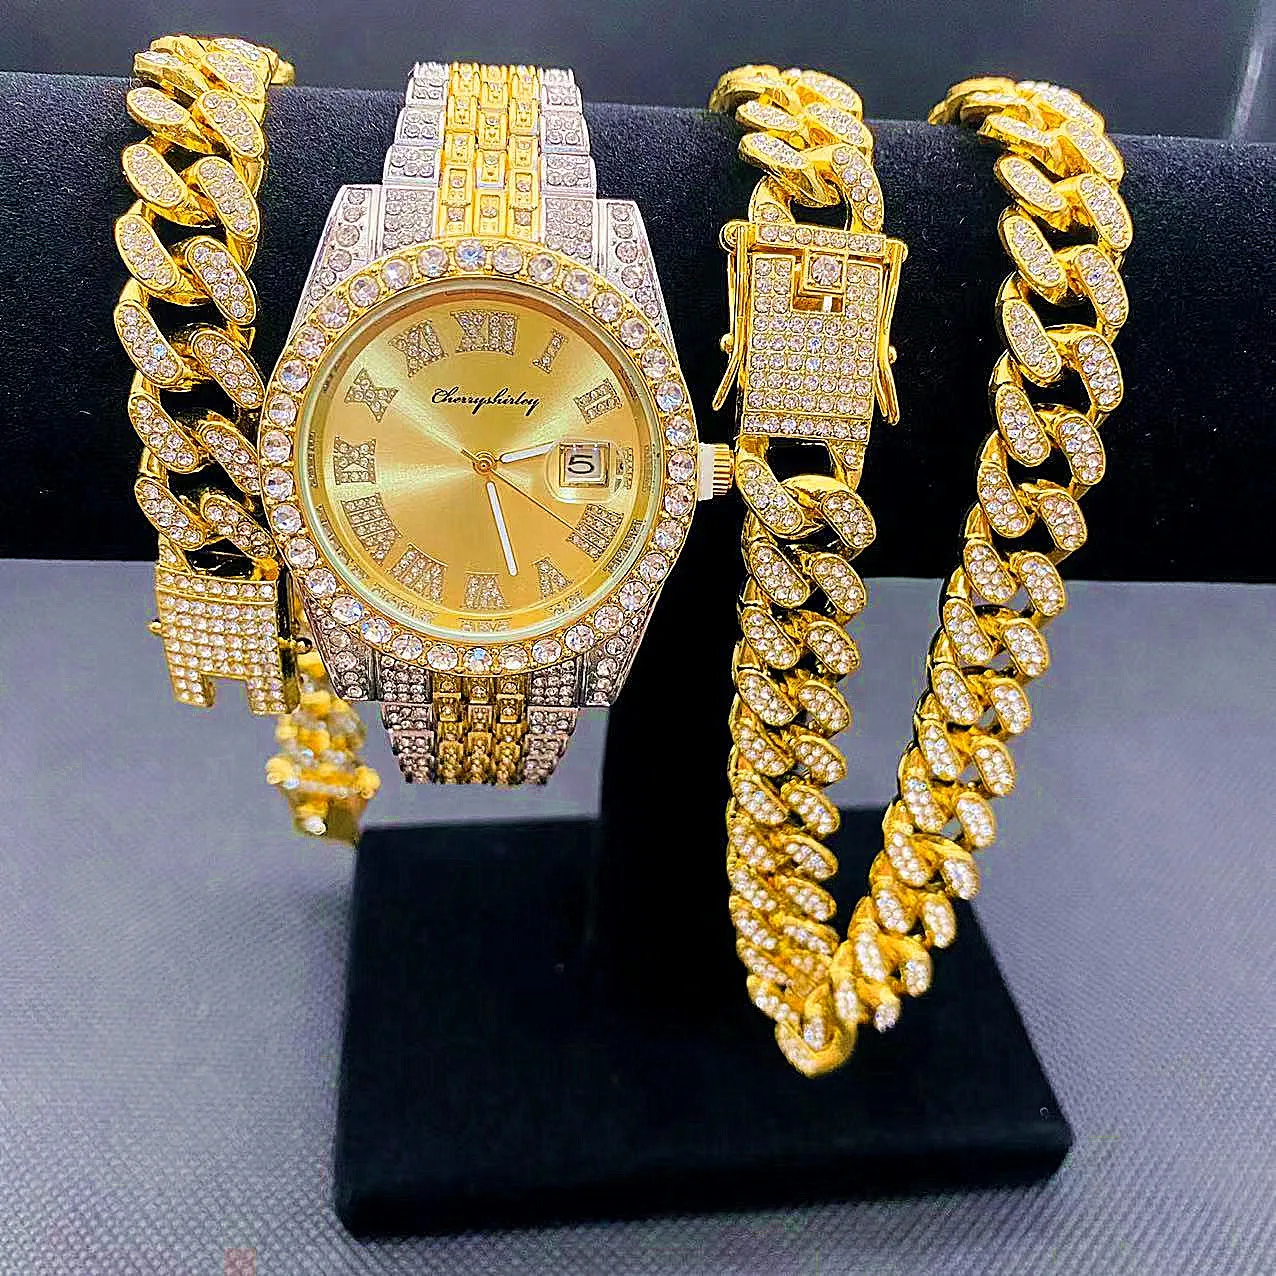 Full Iced Out Watches Mens Cuban Link Chain Bracelet Necklace Couple Bling Jewelry for Men Big Gold Chains Hip Hop Men Watch Set full iced out watch mens cuban link chain bracelet necklace choker bling jewelry for men big gold chains hip hop men watch set